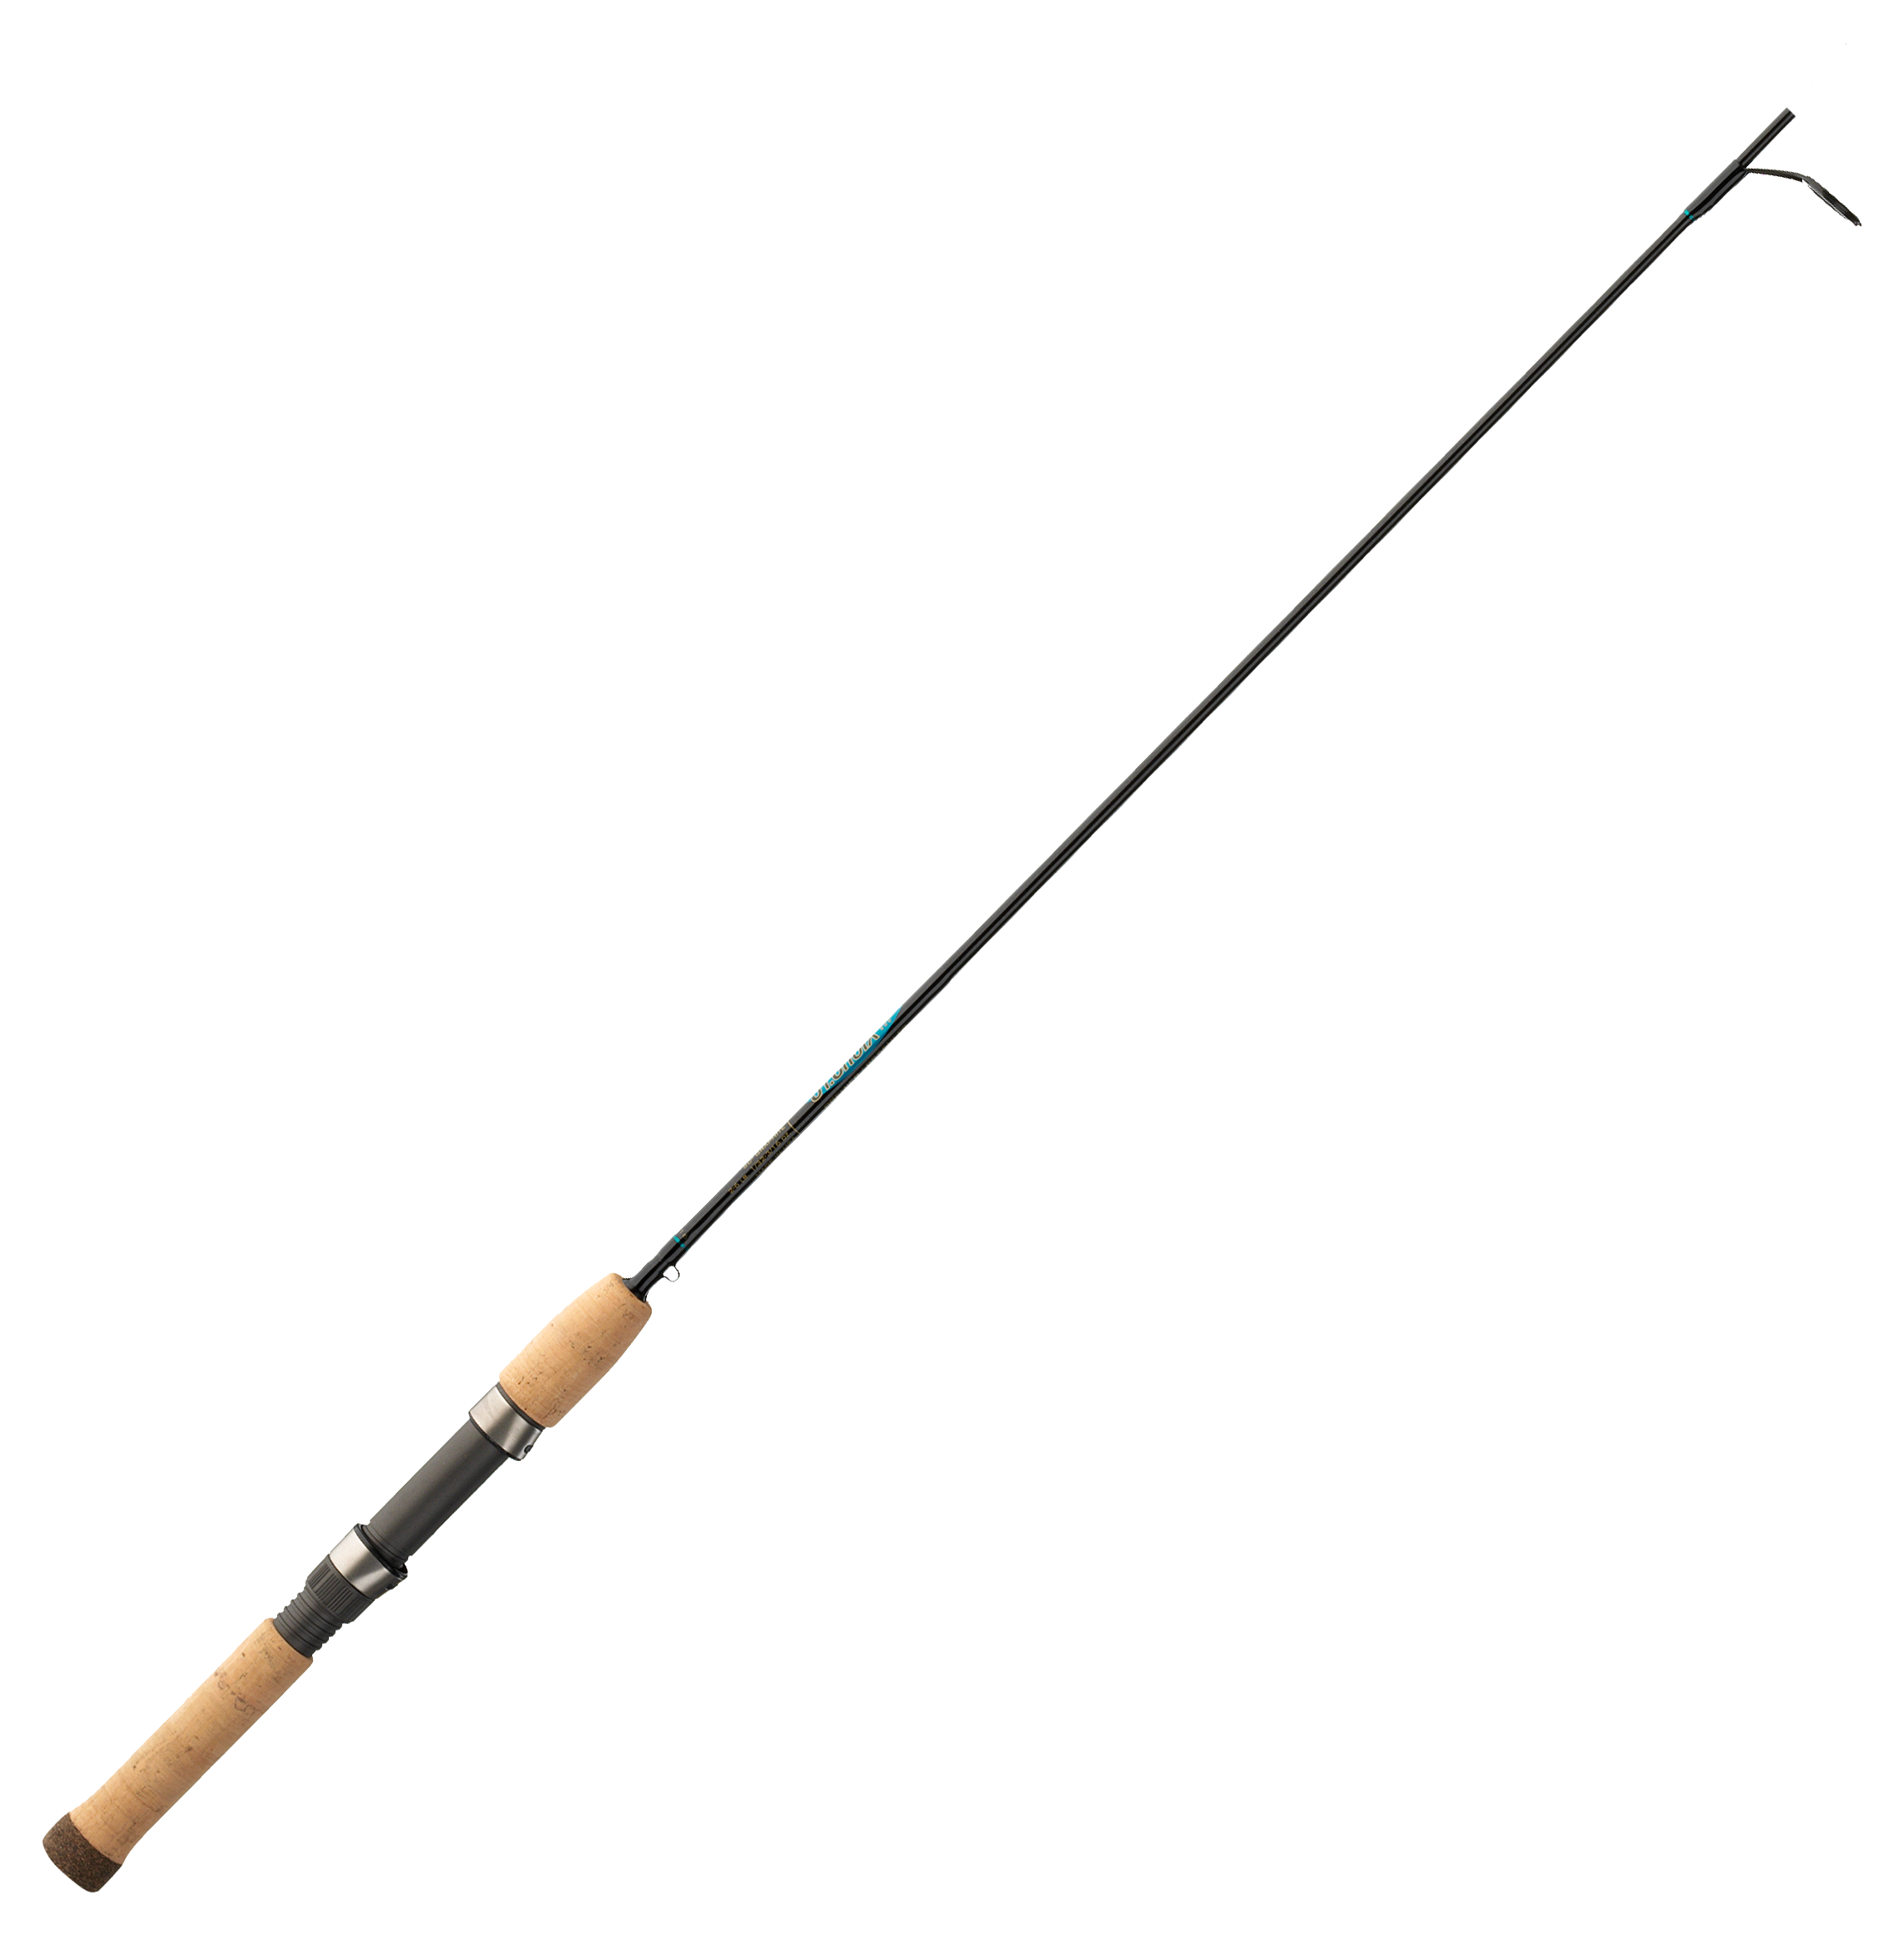 St  Croix Premier Series Spinning Rod - PS60ULF2